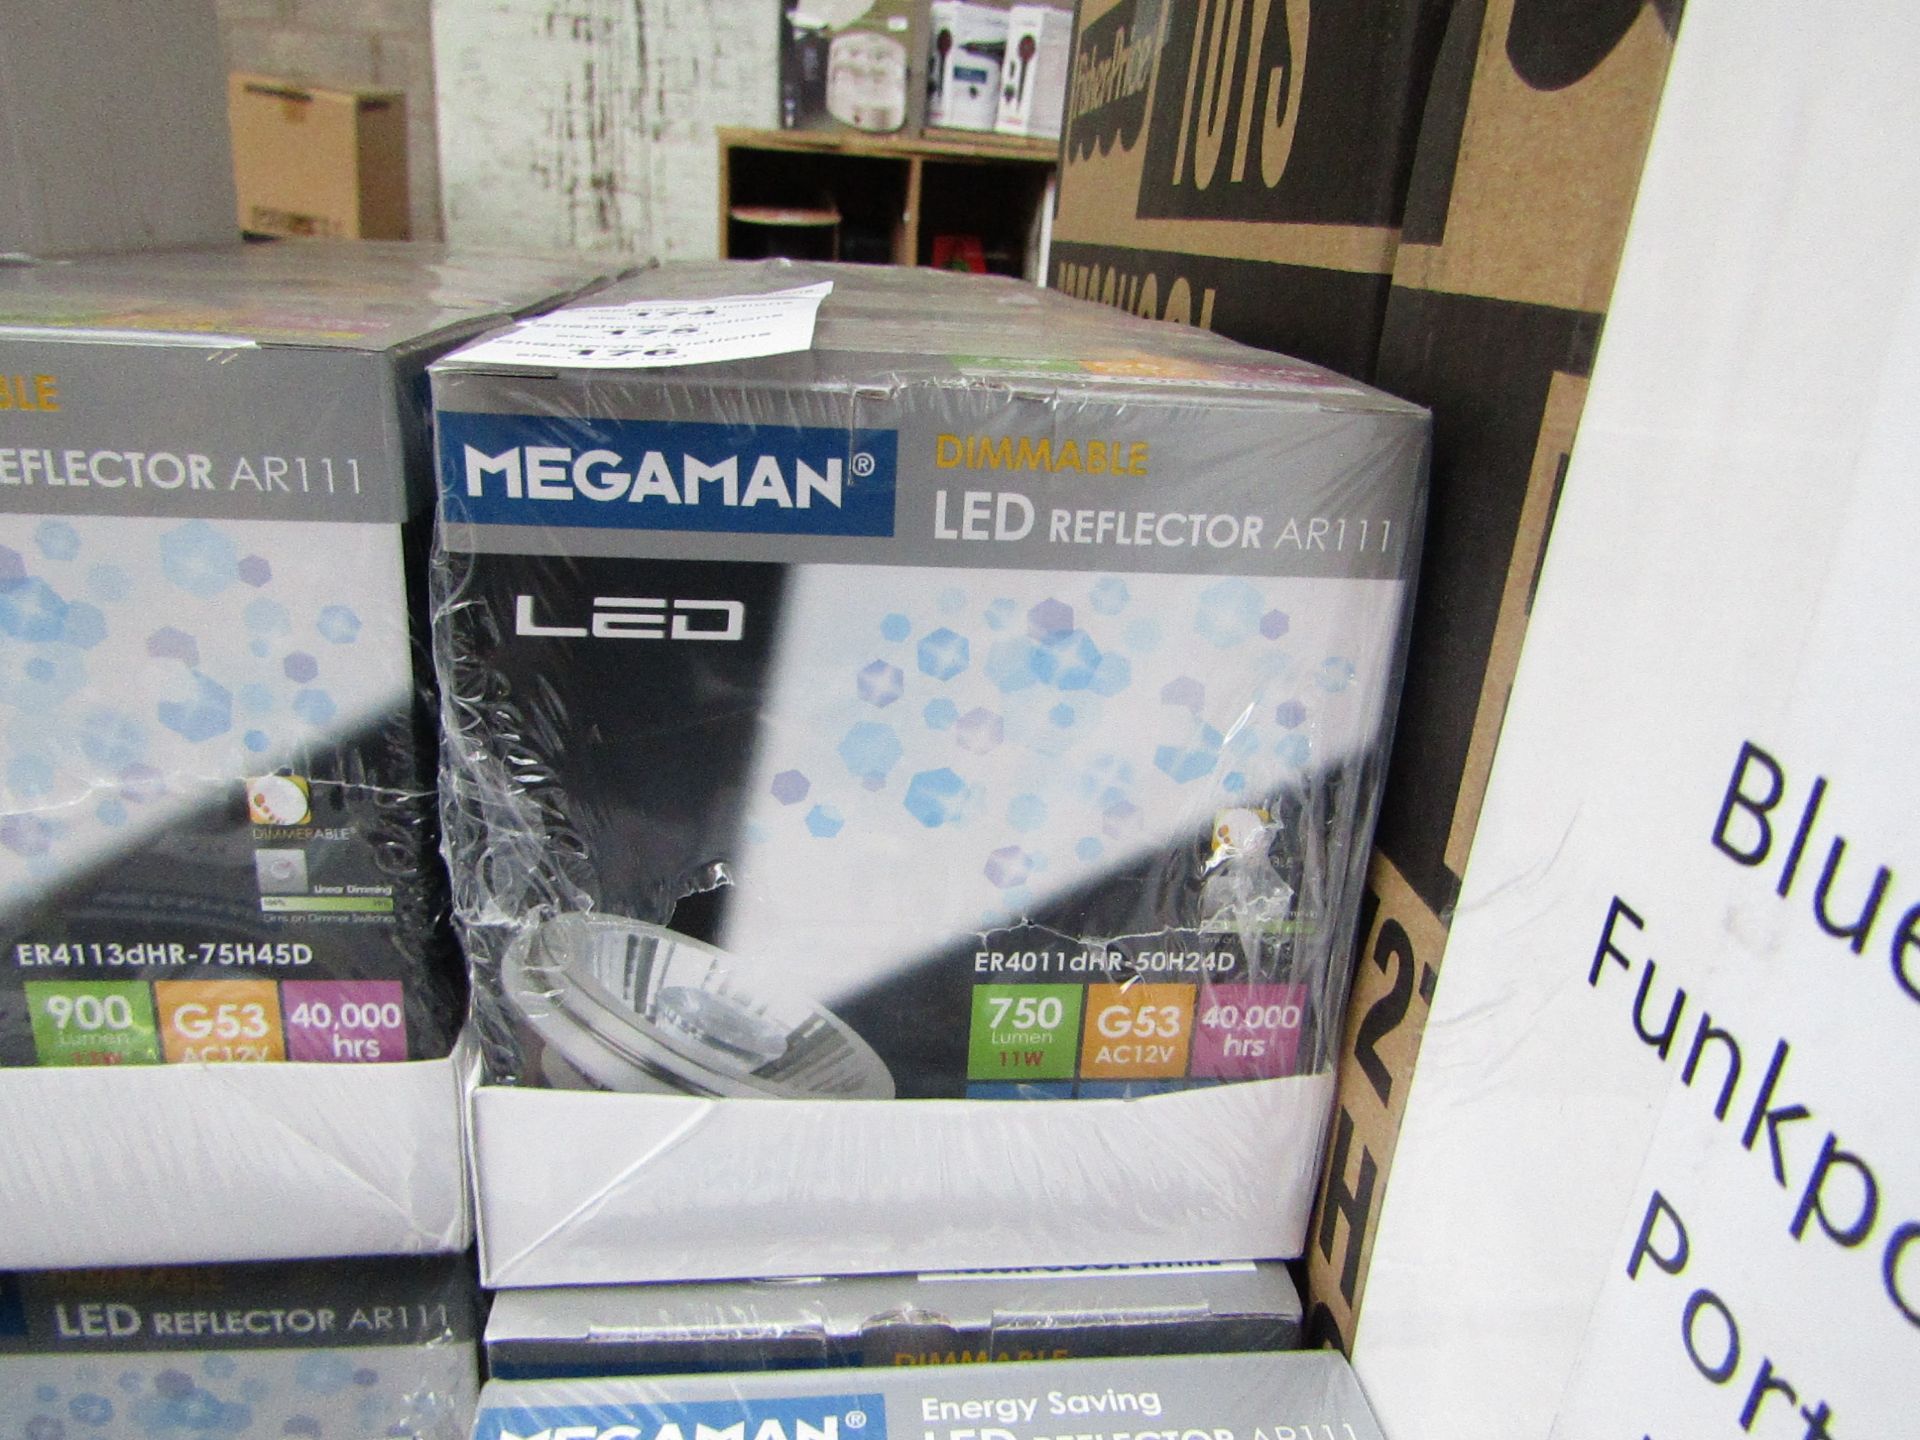 Megaman dimmable bulb, new and boxed. 750 Lumens / G53 / 40,000Hrs RRP Circa £19.99